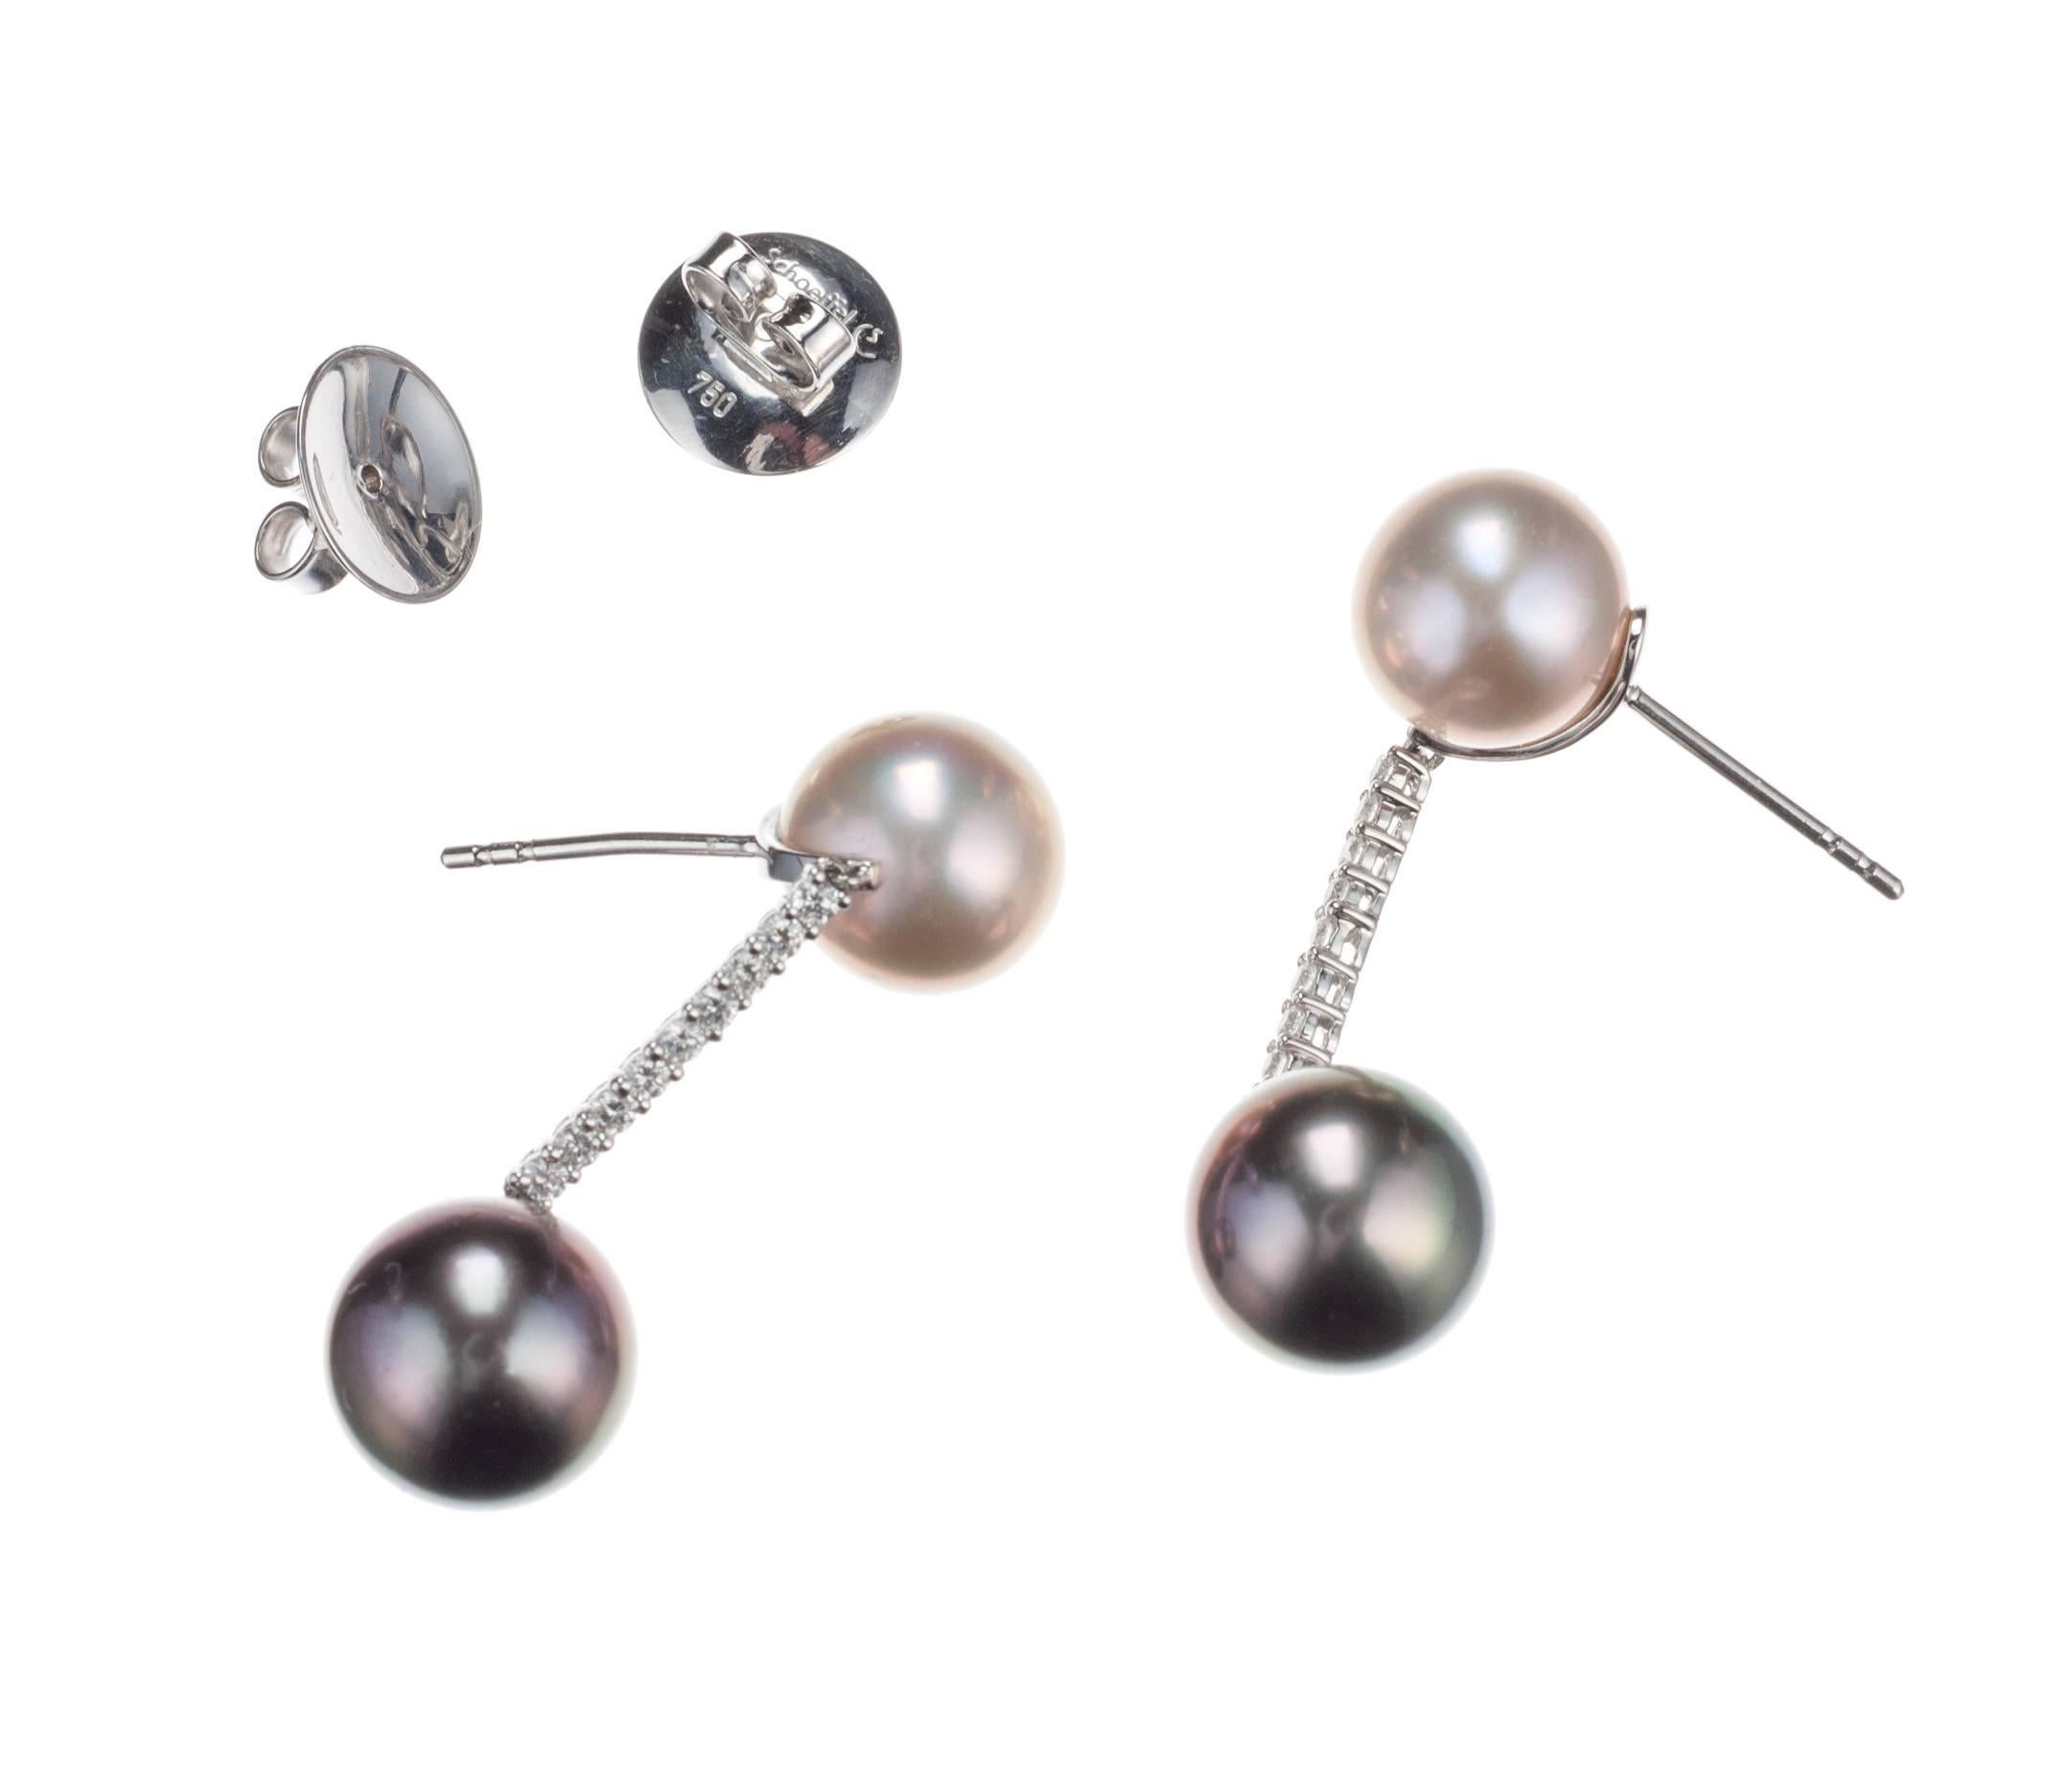 A playful pair of pearl drop earrings, from German designer Schoeffel, are set with one pair of freshwater cultured pearls, approx. 10mm, and one pair of tahitian cultured pearls, approx. 10.5mm. Eighteen brilliant-cut round diamonds, .29ctw. of G